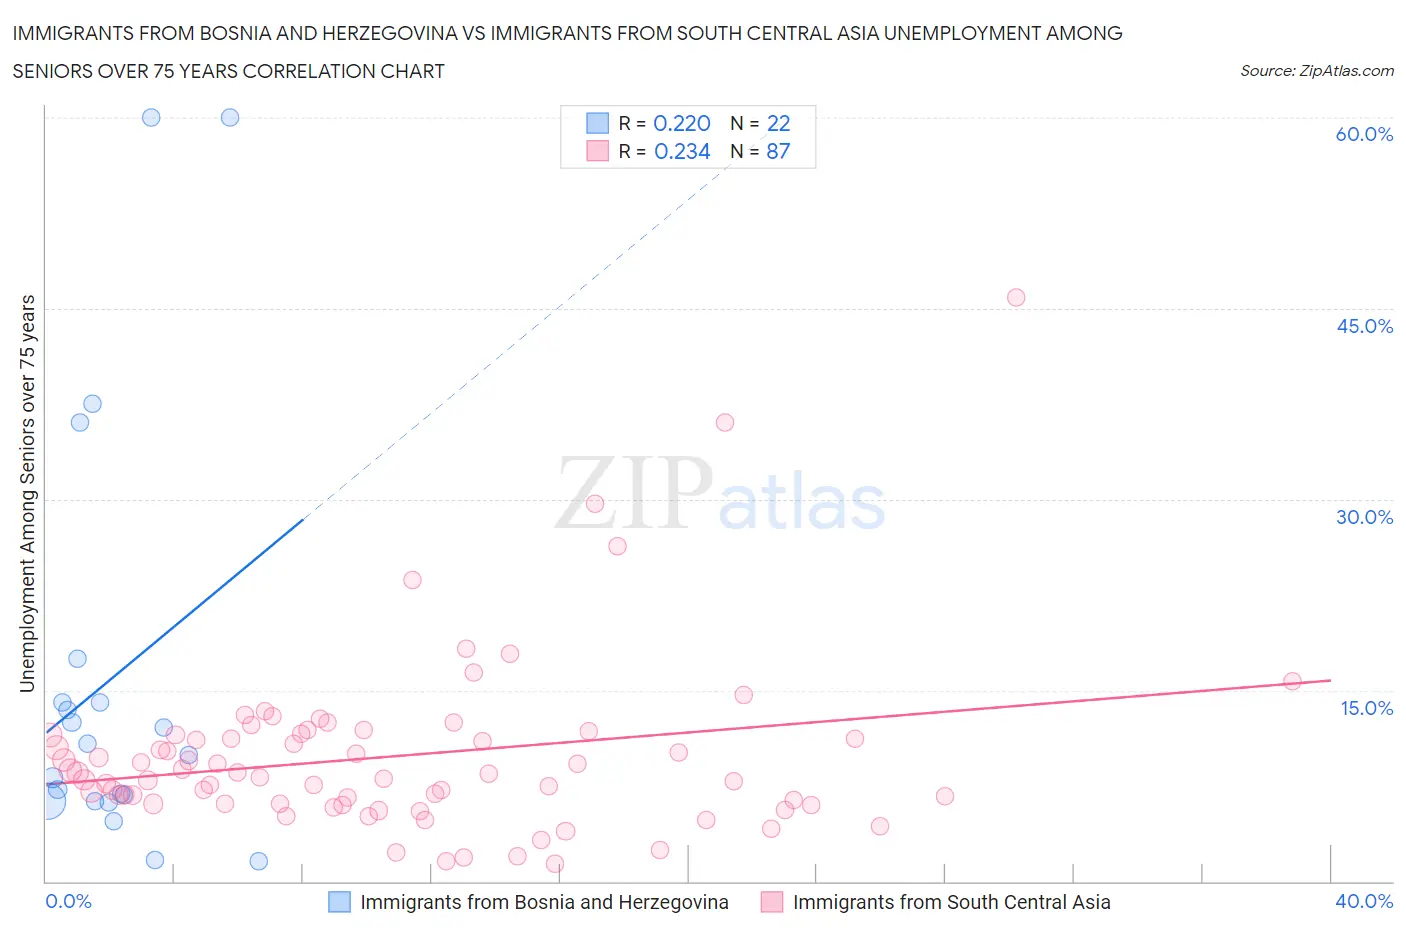 Immigrants from Bosnia and Herzegovina vs Immigrants from South Central Asia Unemployment Among Seniors over 75 years